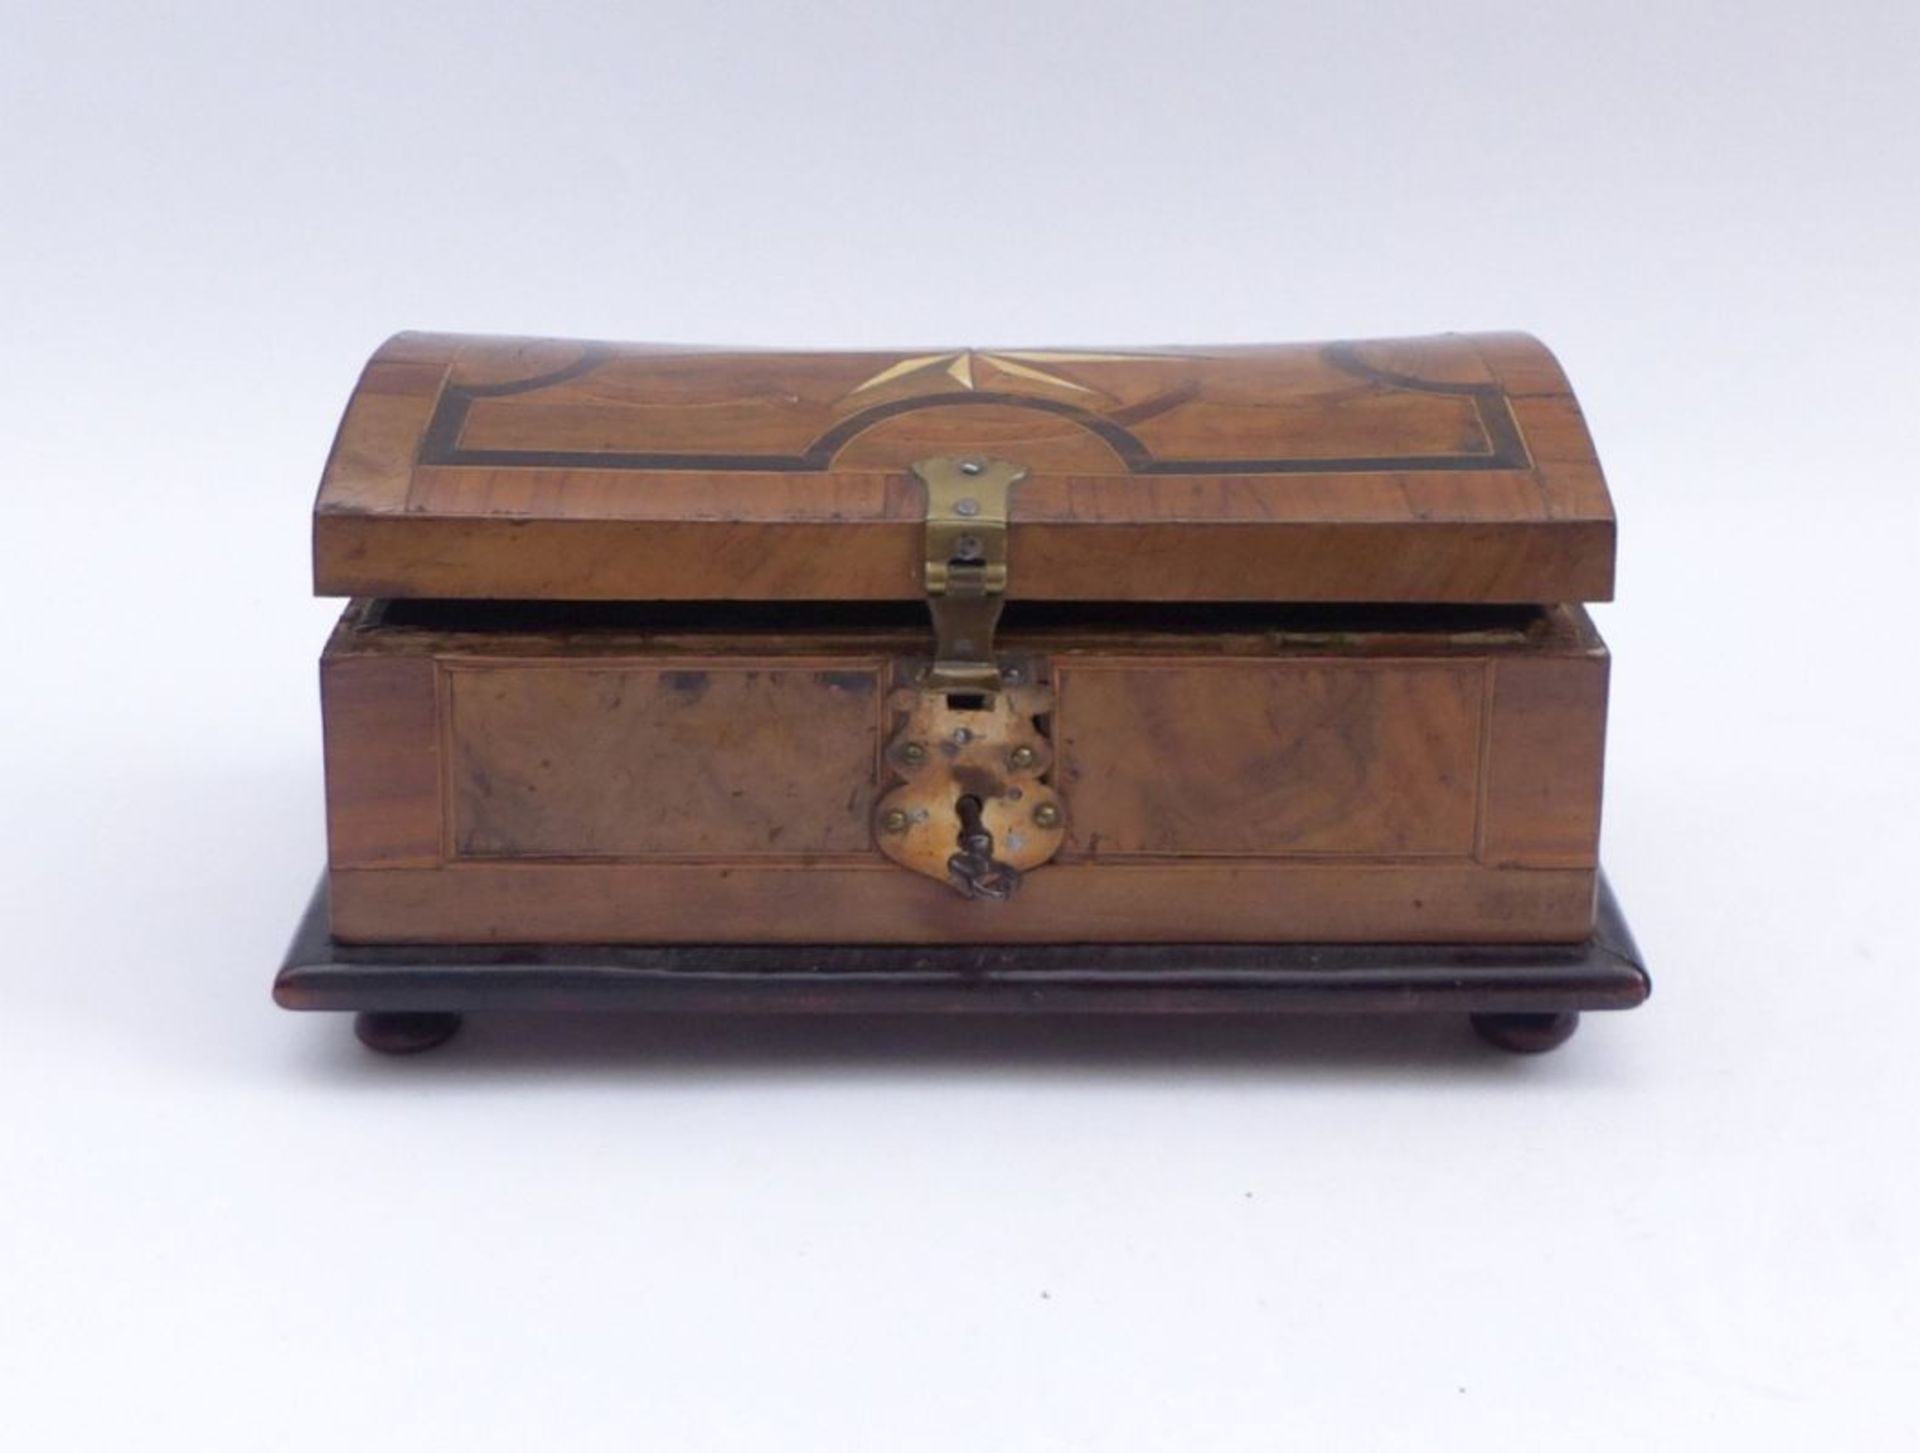 Small boxSouthern Germany, Mid 18th c.Chest-shaped corpus on ball feet, arched hinged lid with